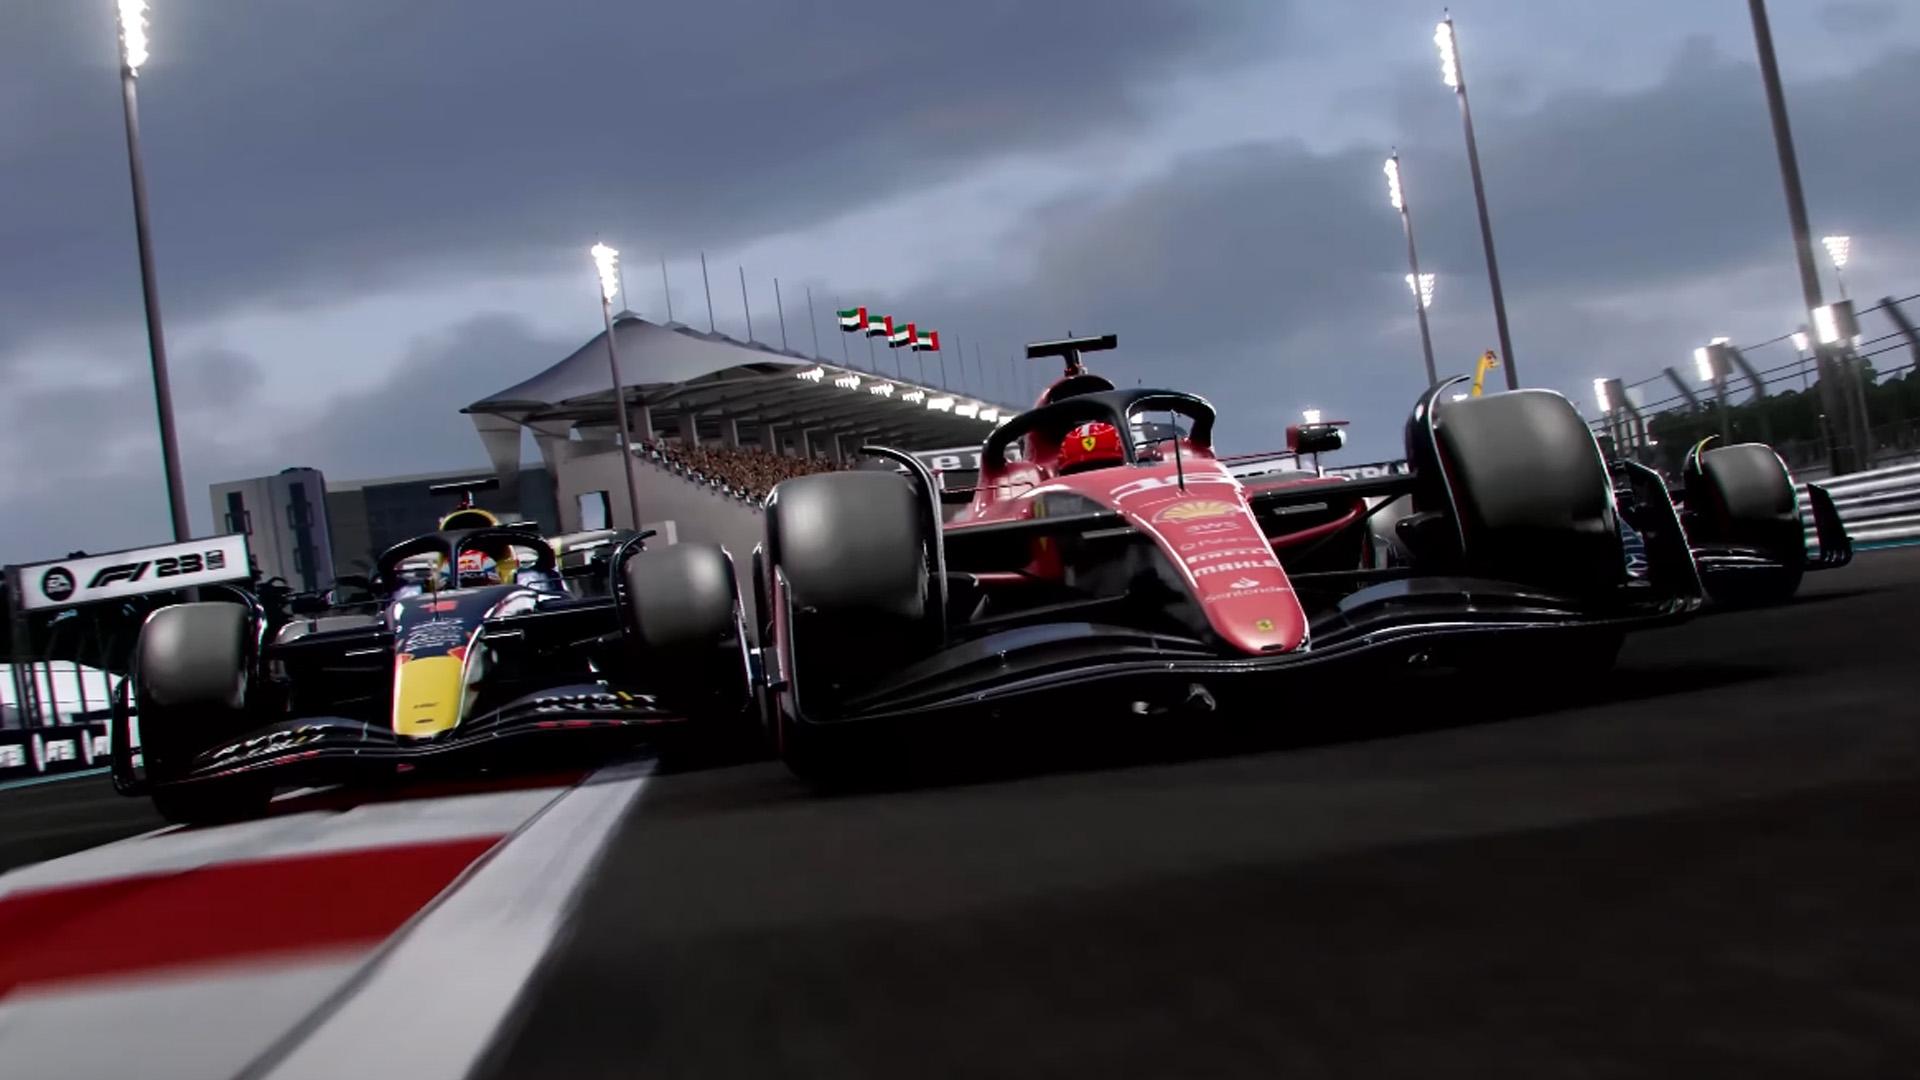 F1 23s F1 World mode adds car upgrades, division-based ranked races Traxion